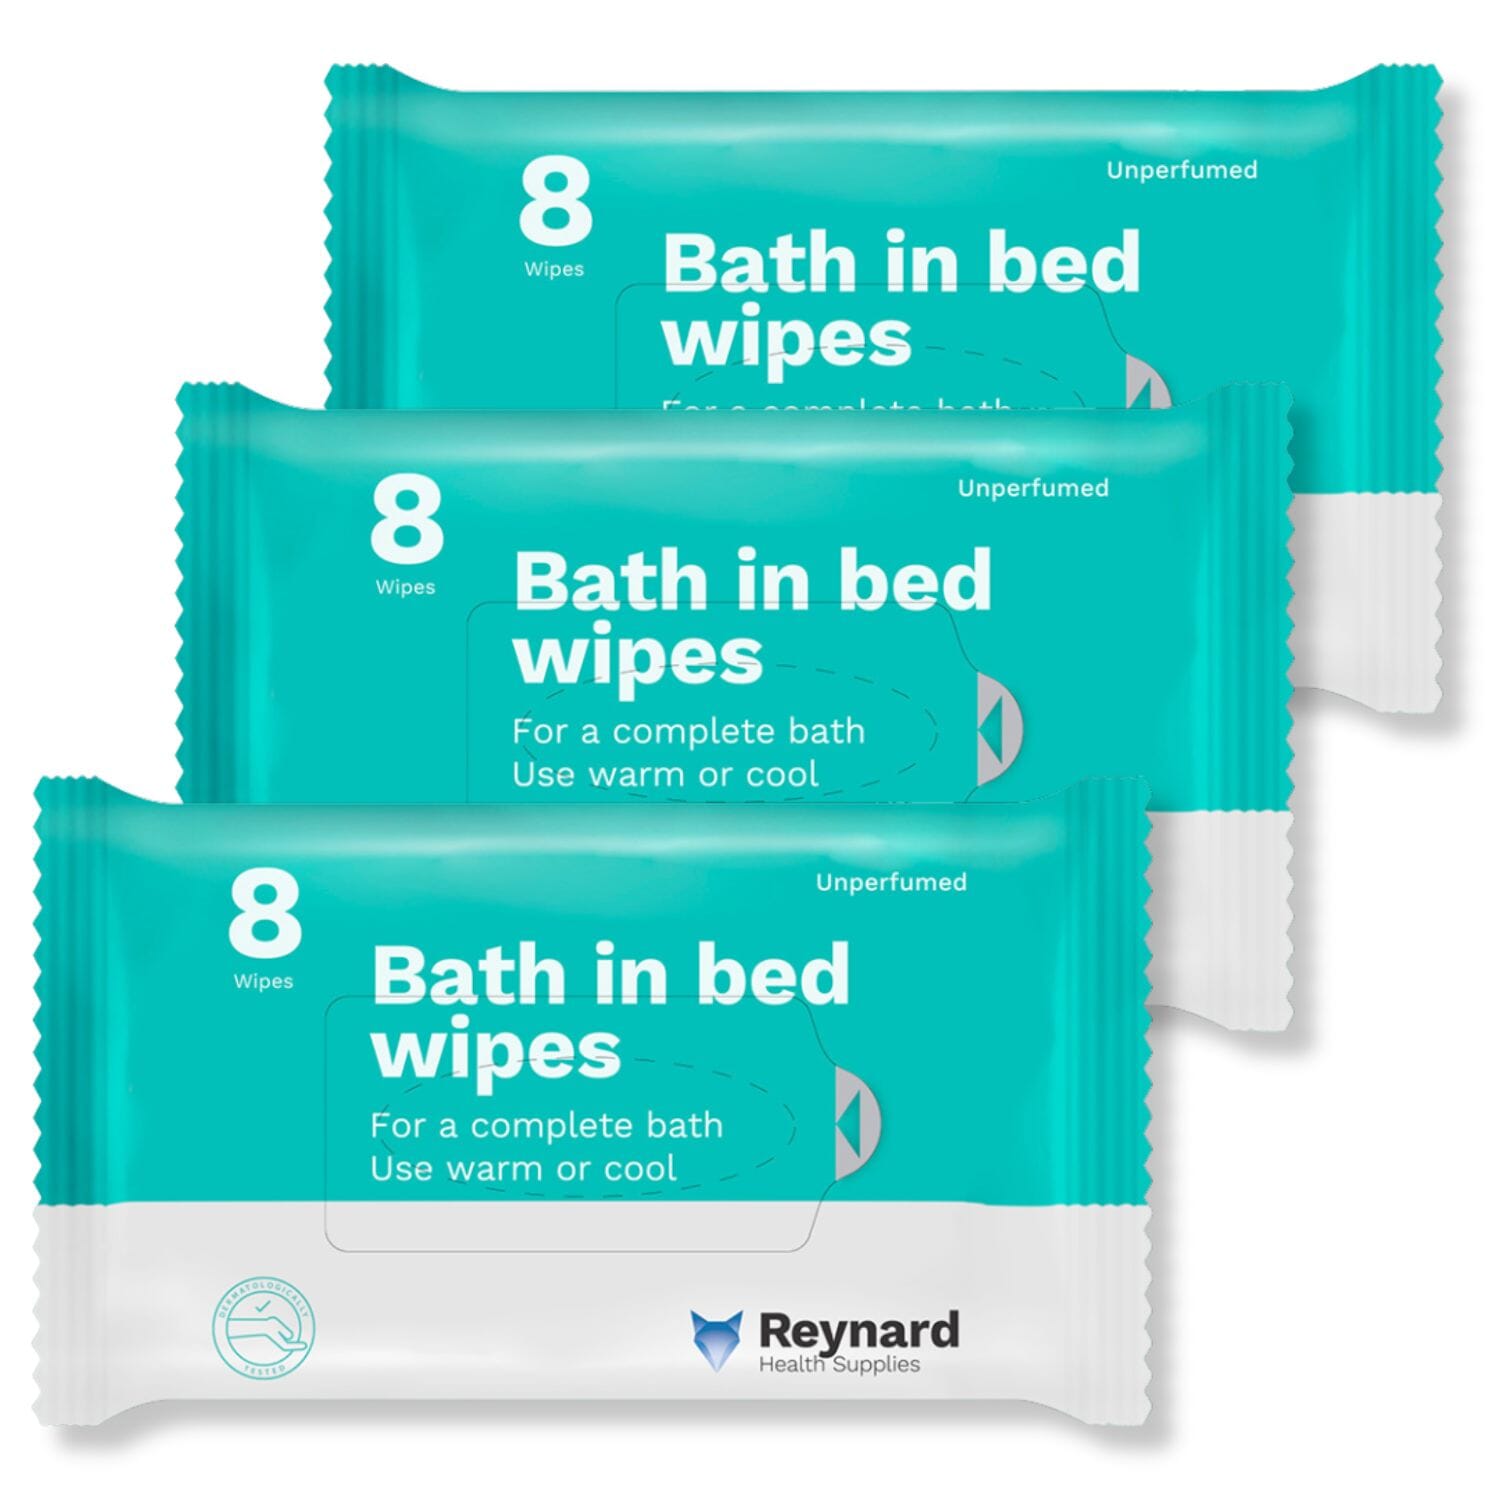 View Bath In Bed Wipes 3 Packs information